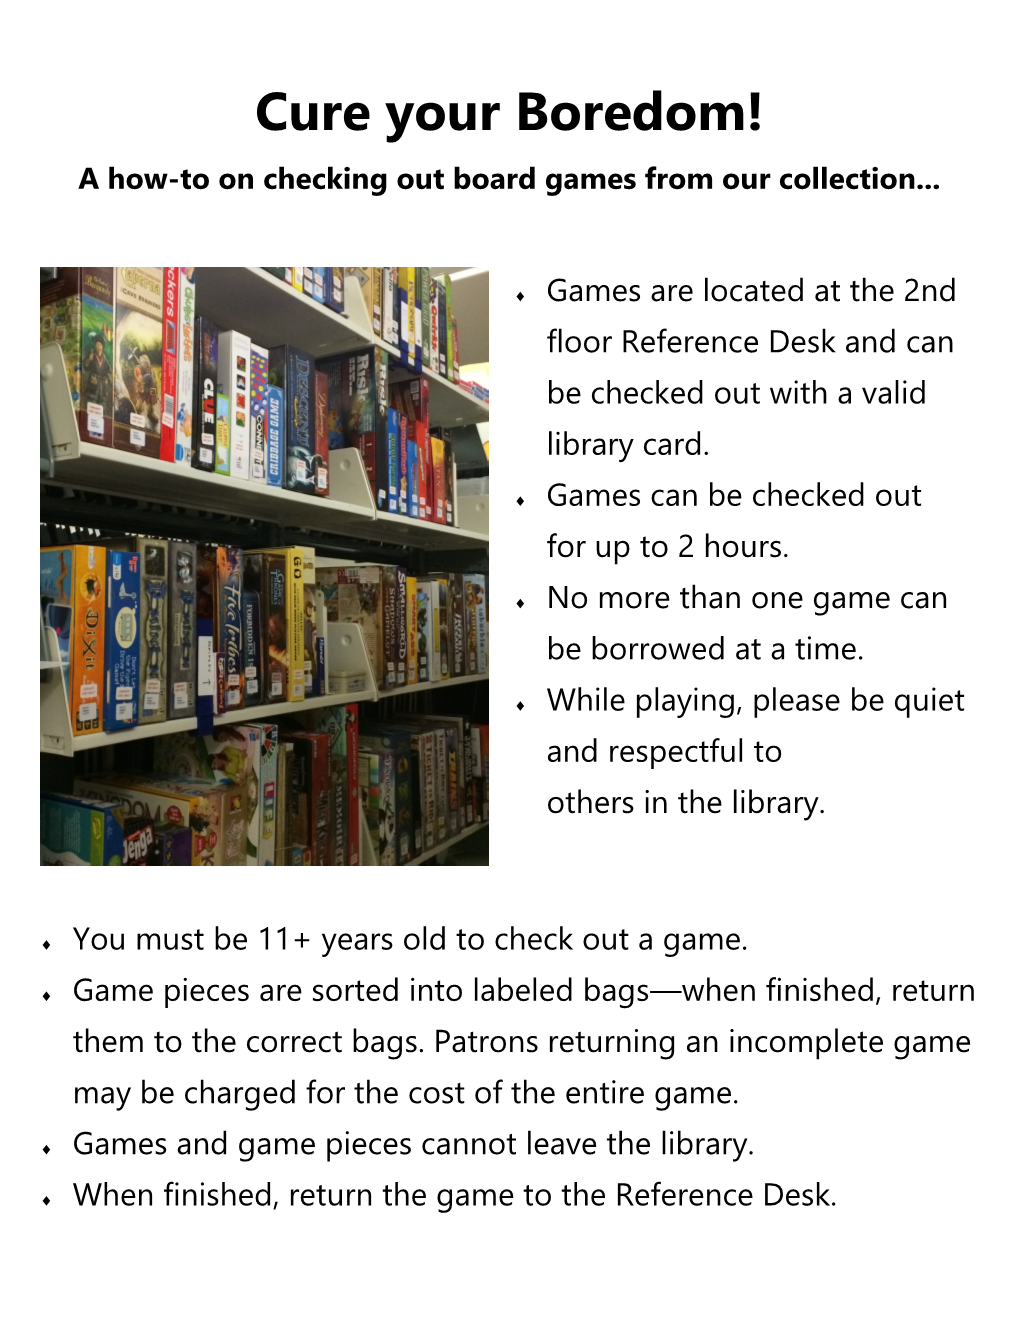 Cure Your Boredom! a How-To on Checking out Board Games from Our Collection